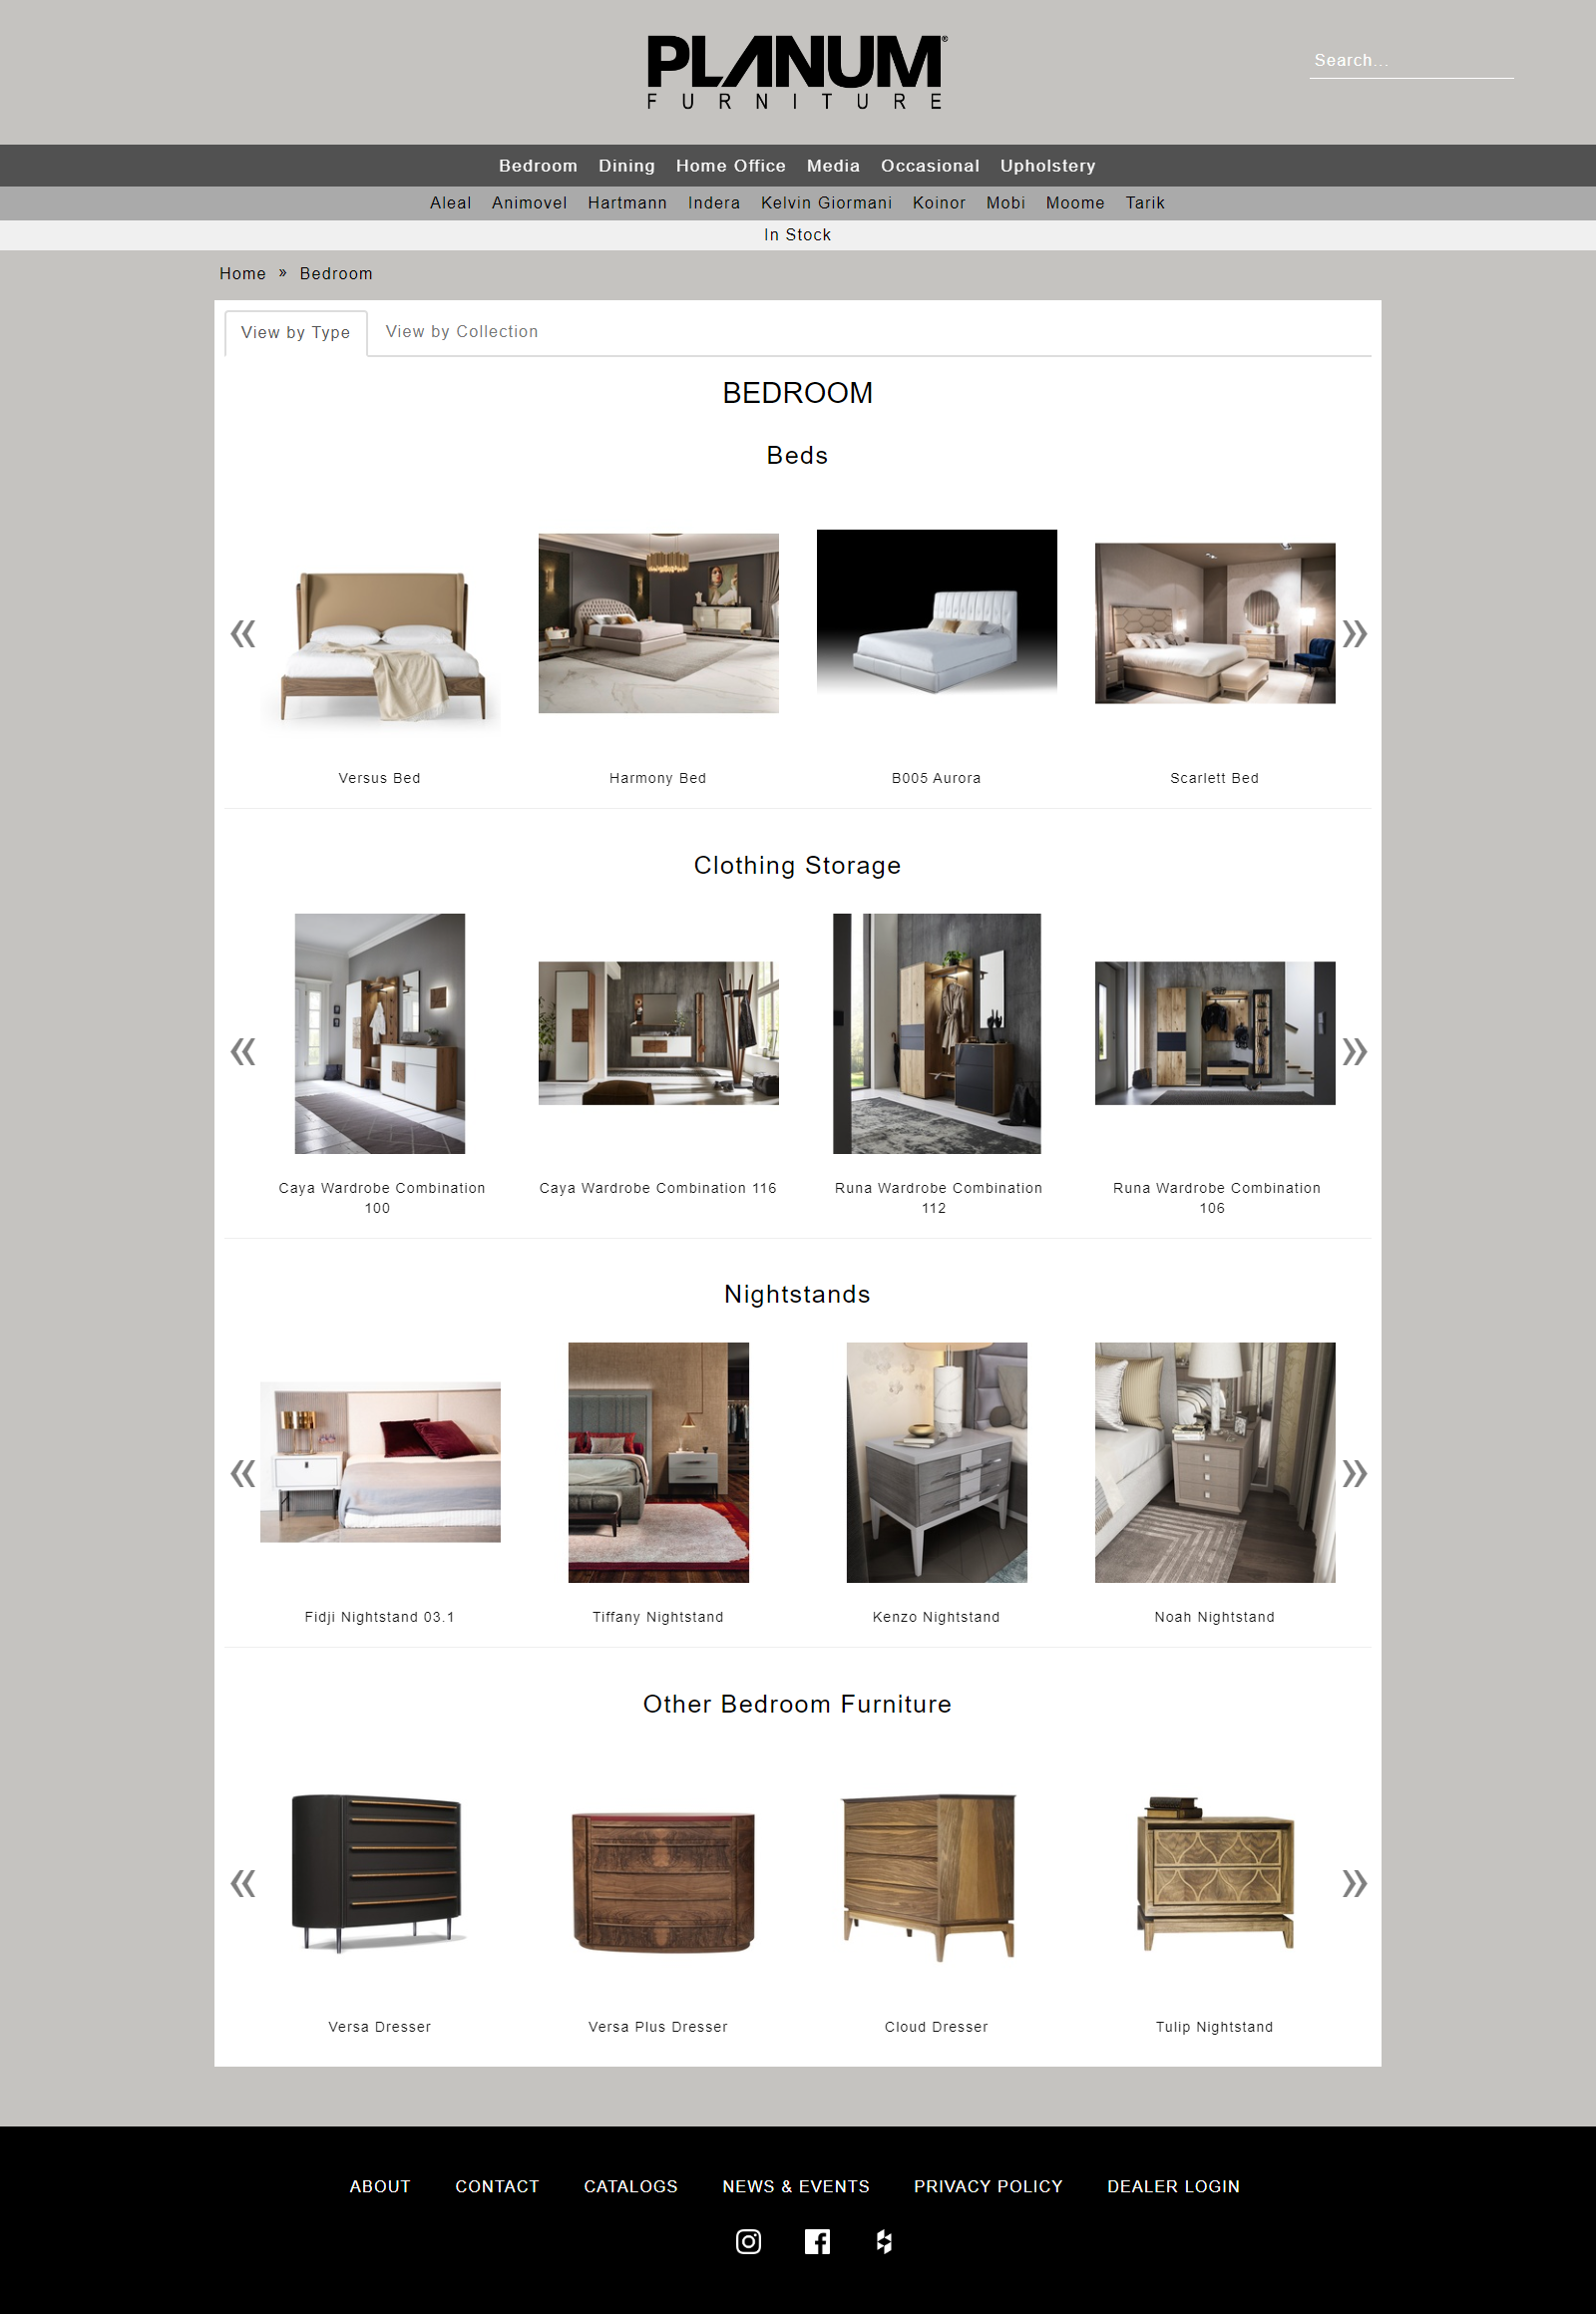 A screenshot of a website showing a variety of furniture.